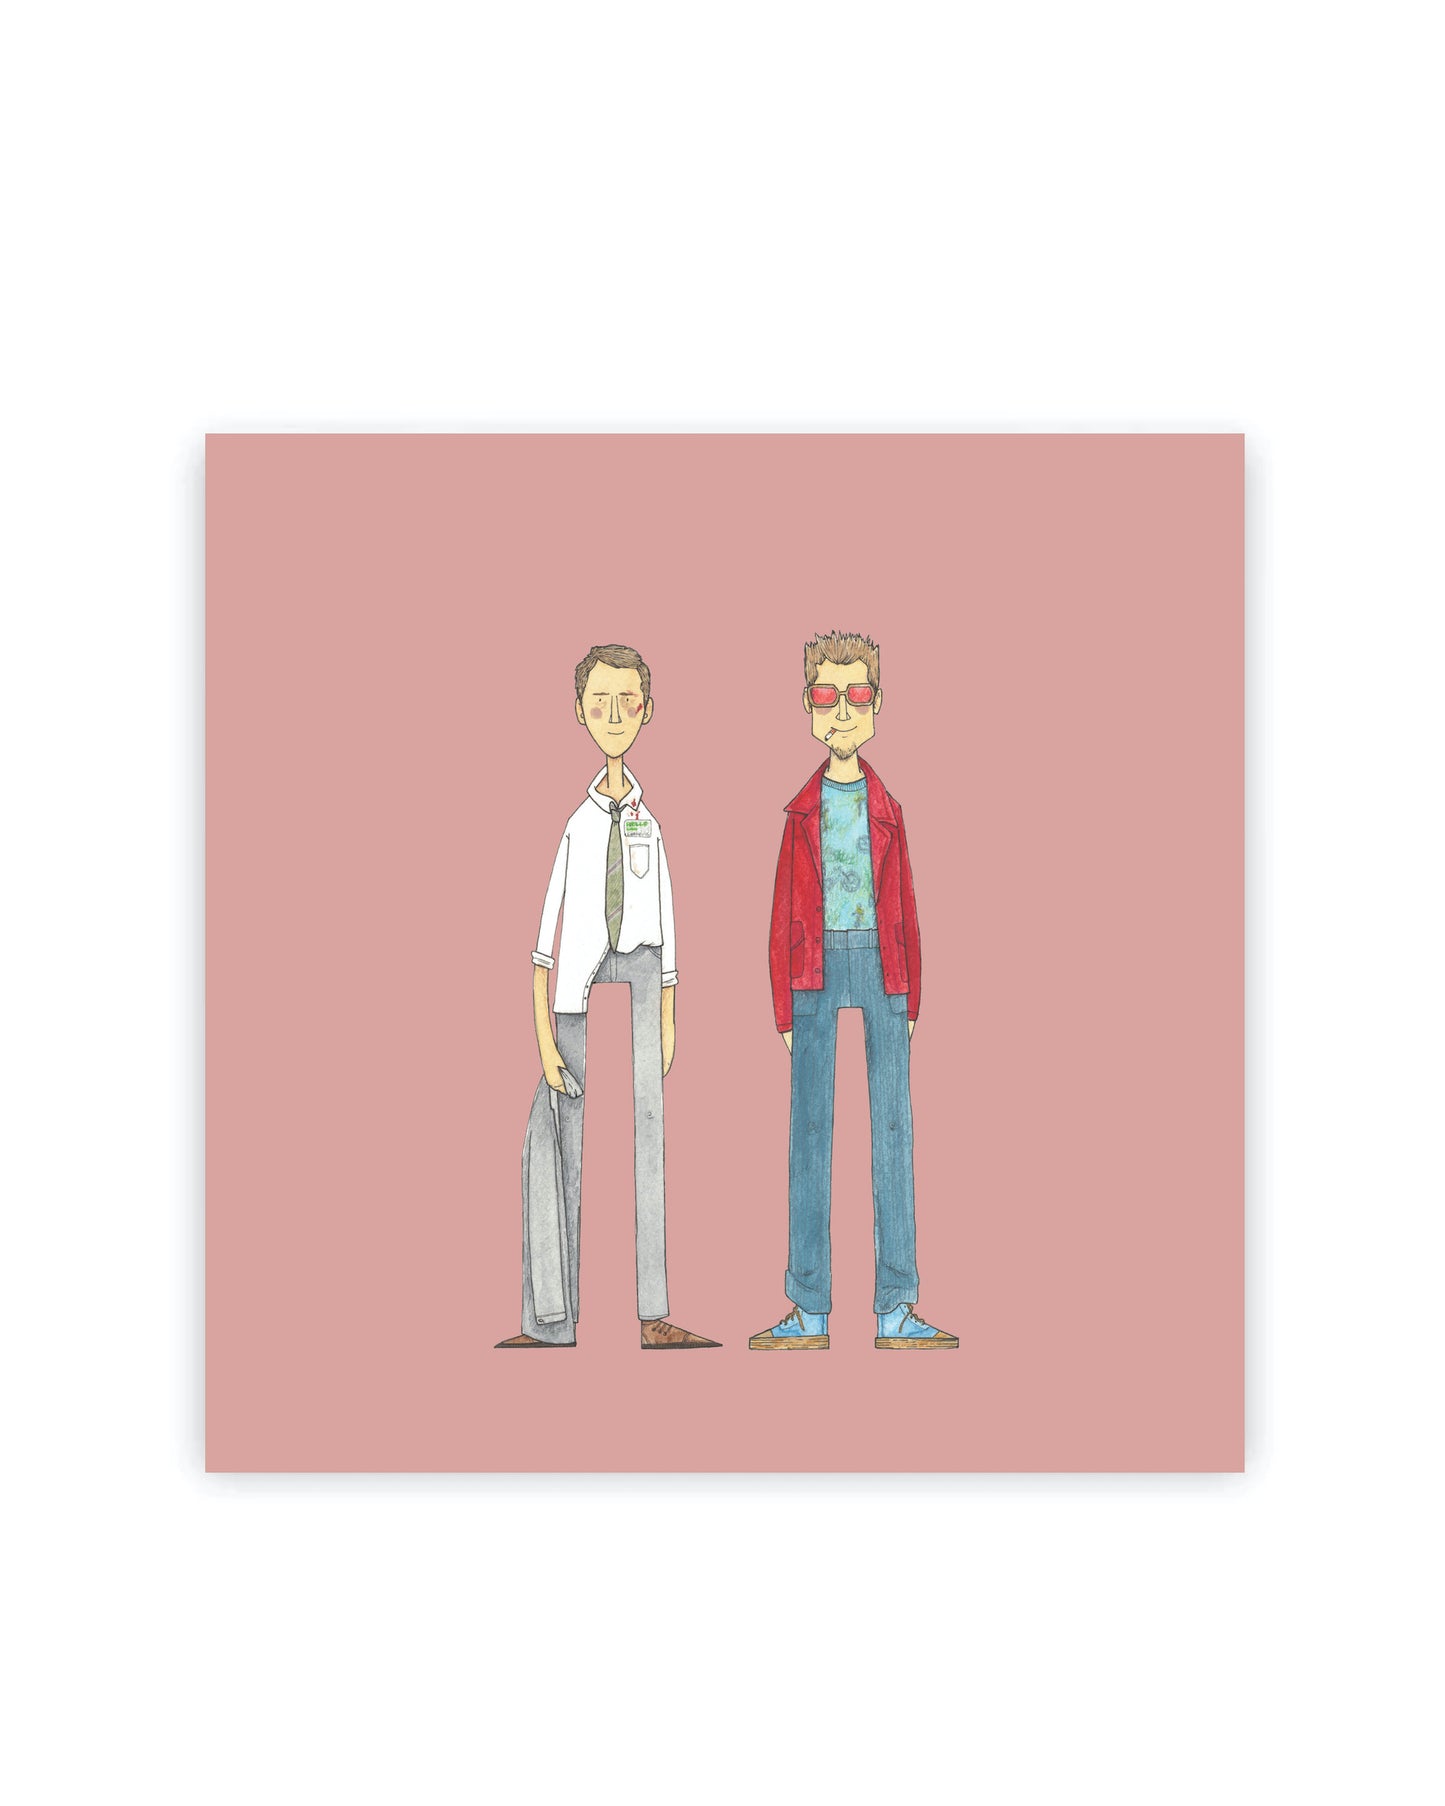 THE DREAM TEAMS series - Fine Art Prints of the Coolest Duos from Popular Culture